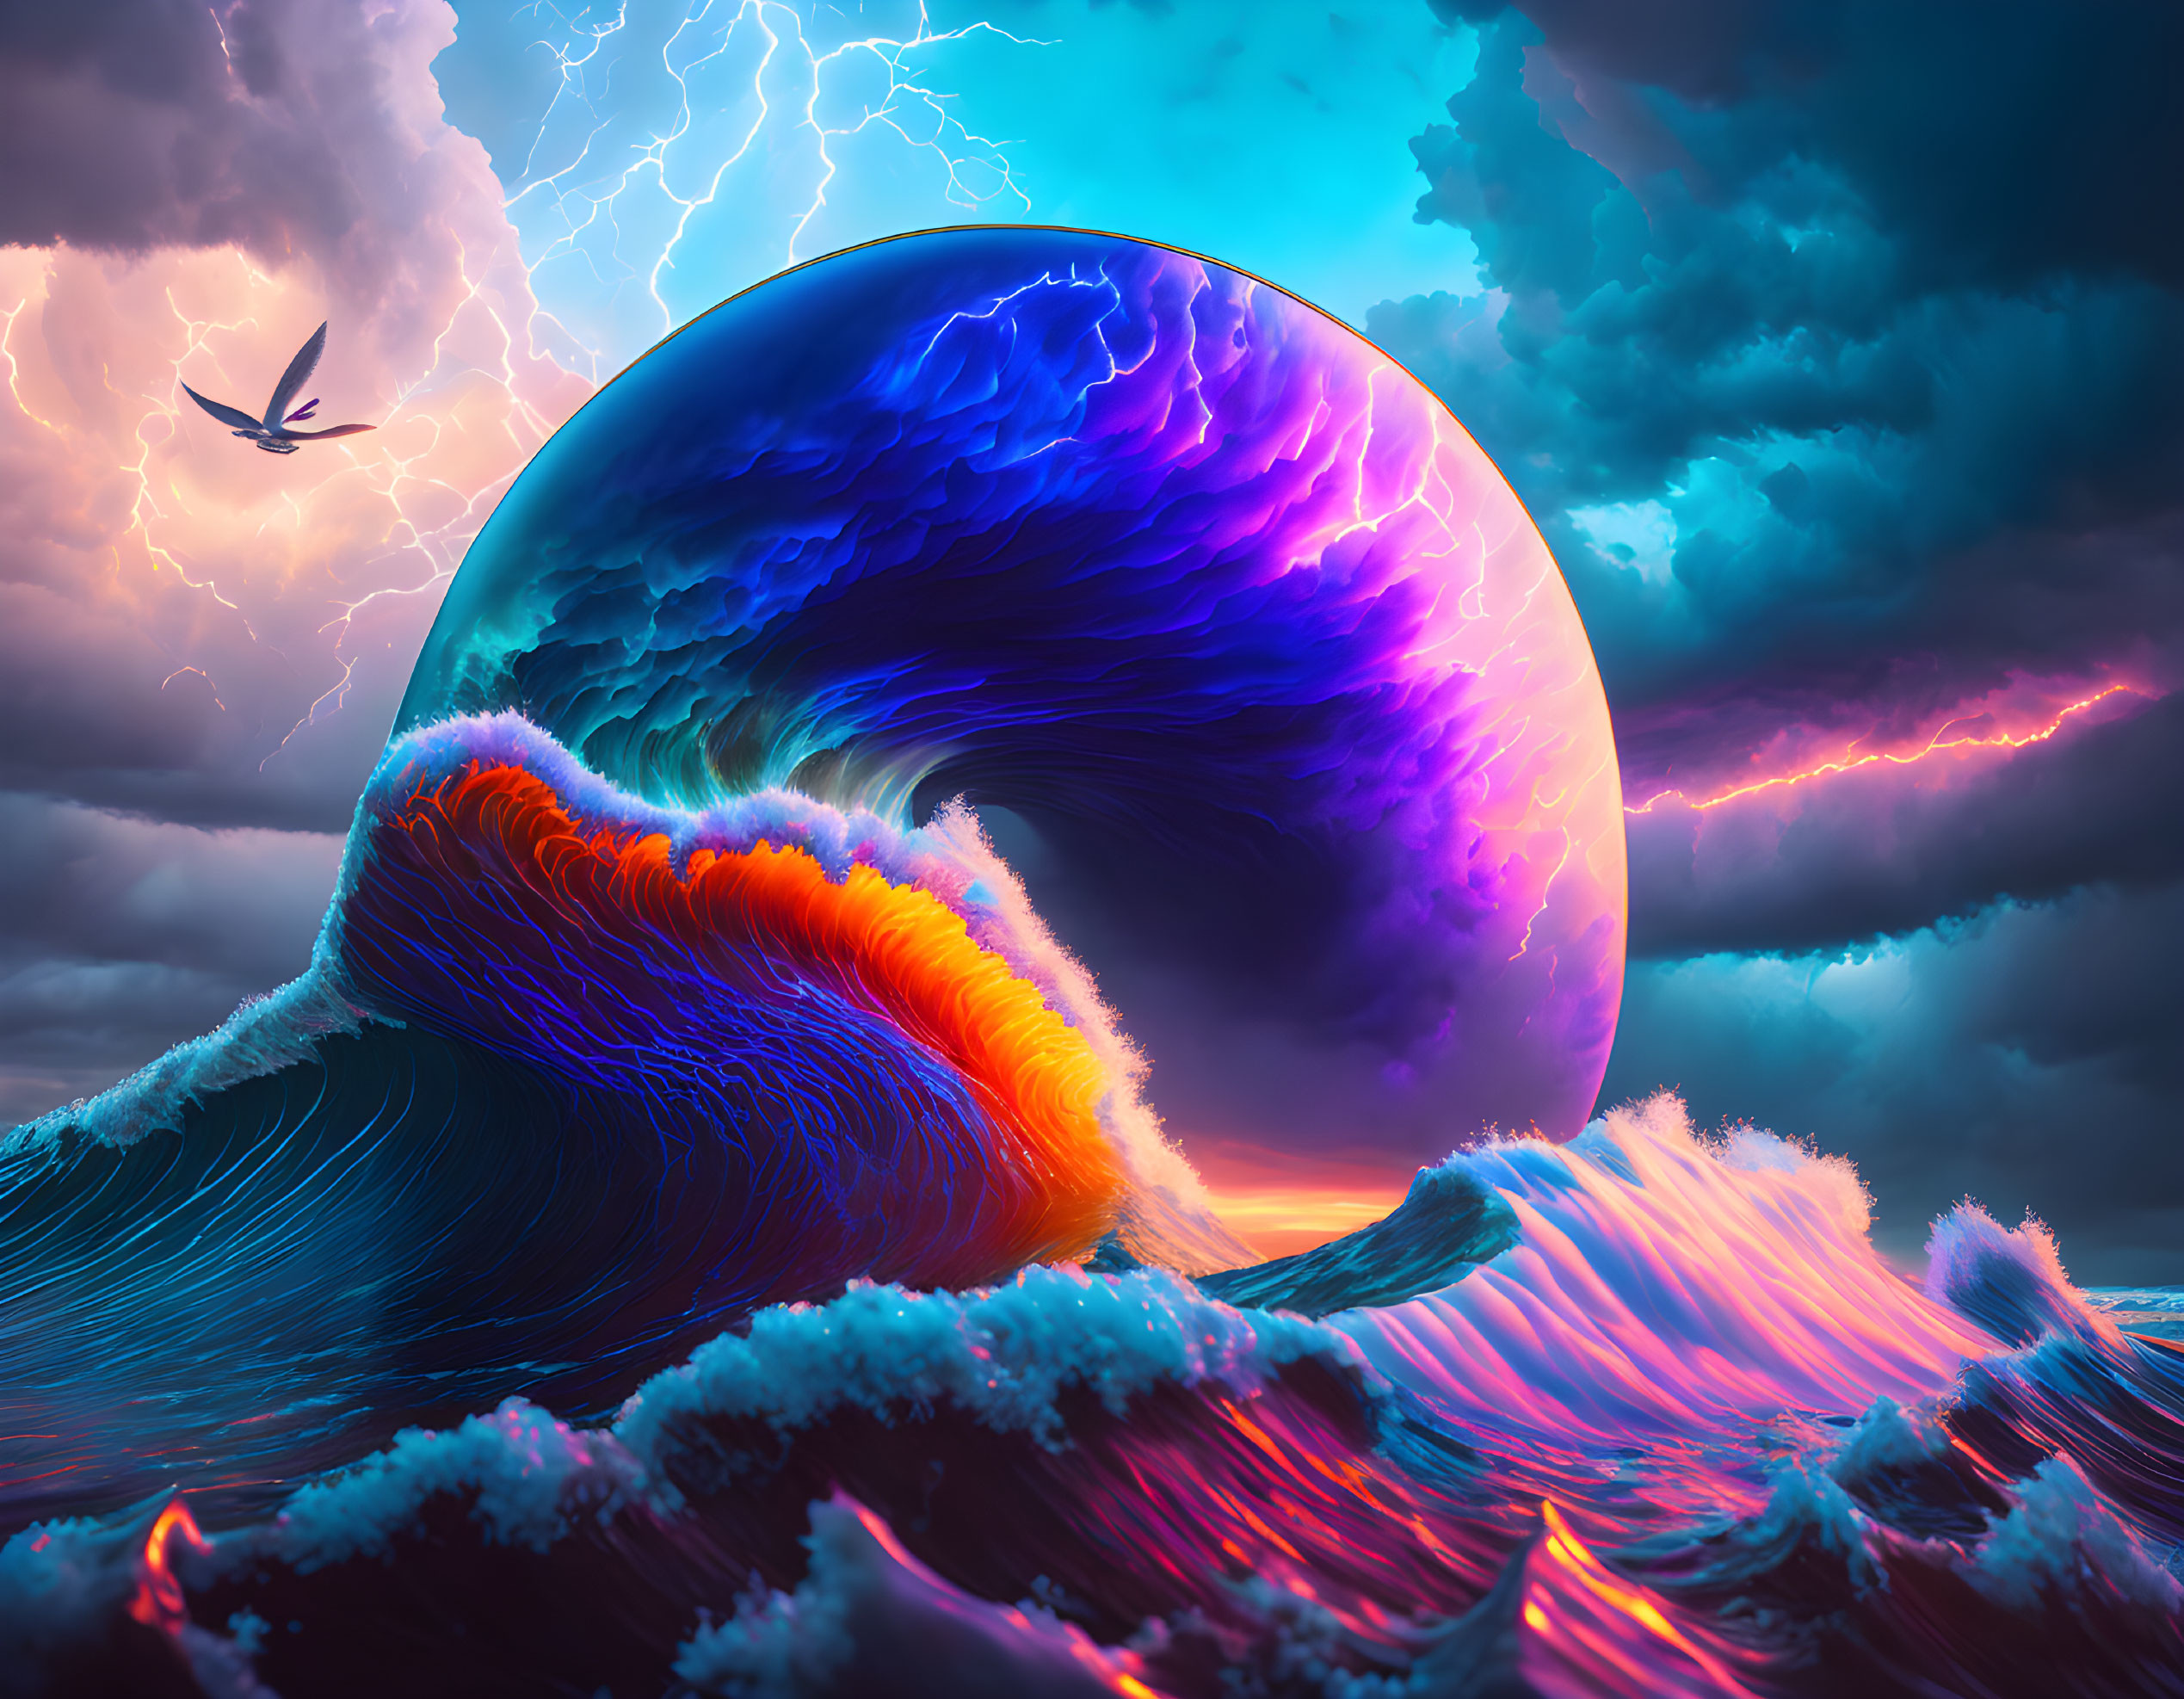 Surreal digital artwork: luminescent wave, giant sphere, stormy sky